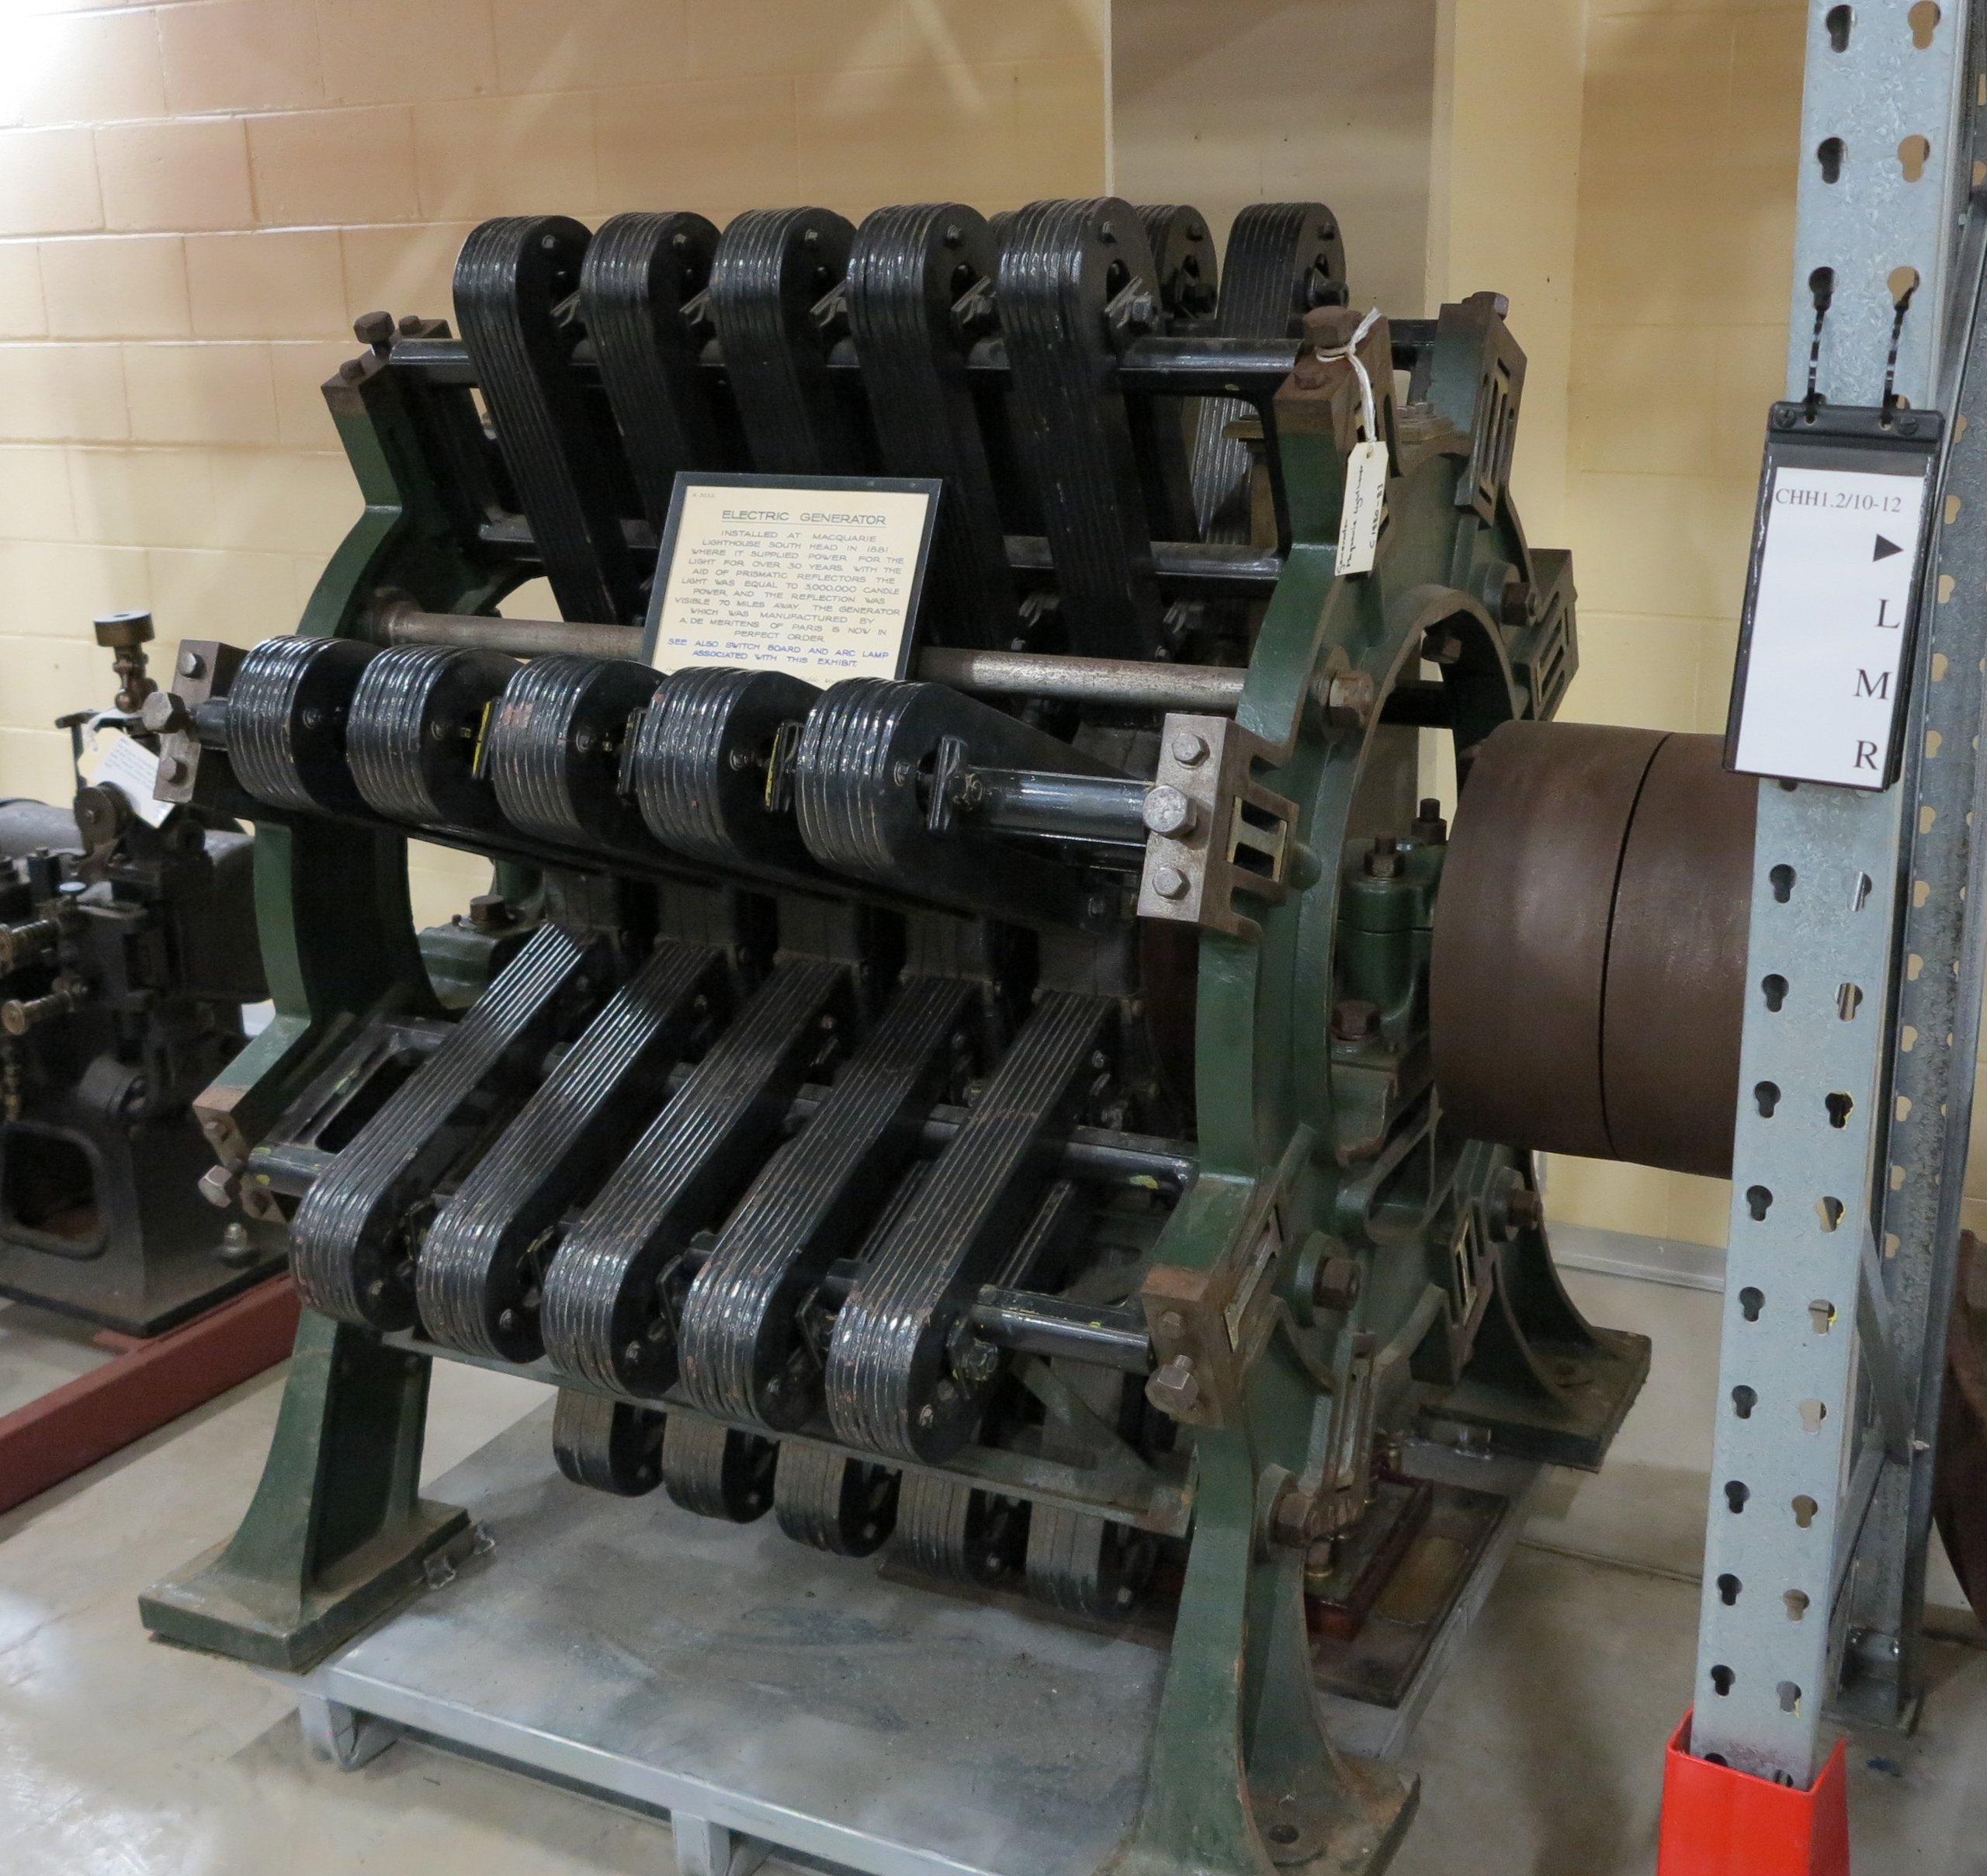 Electricity generator used at Macquarie Lighthouse